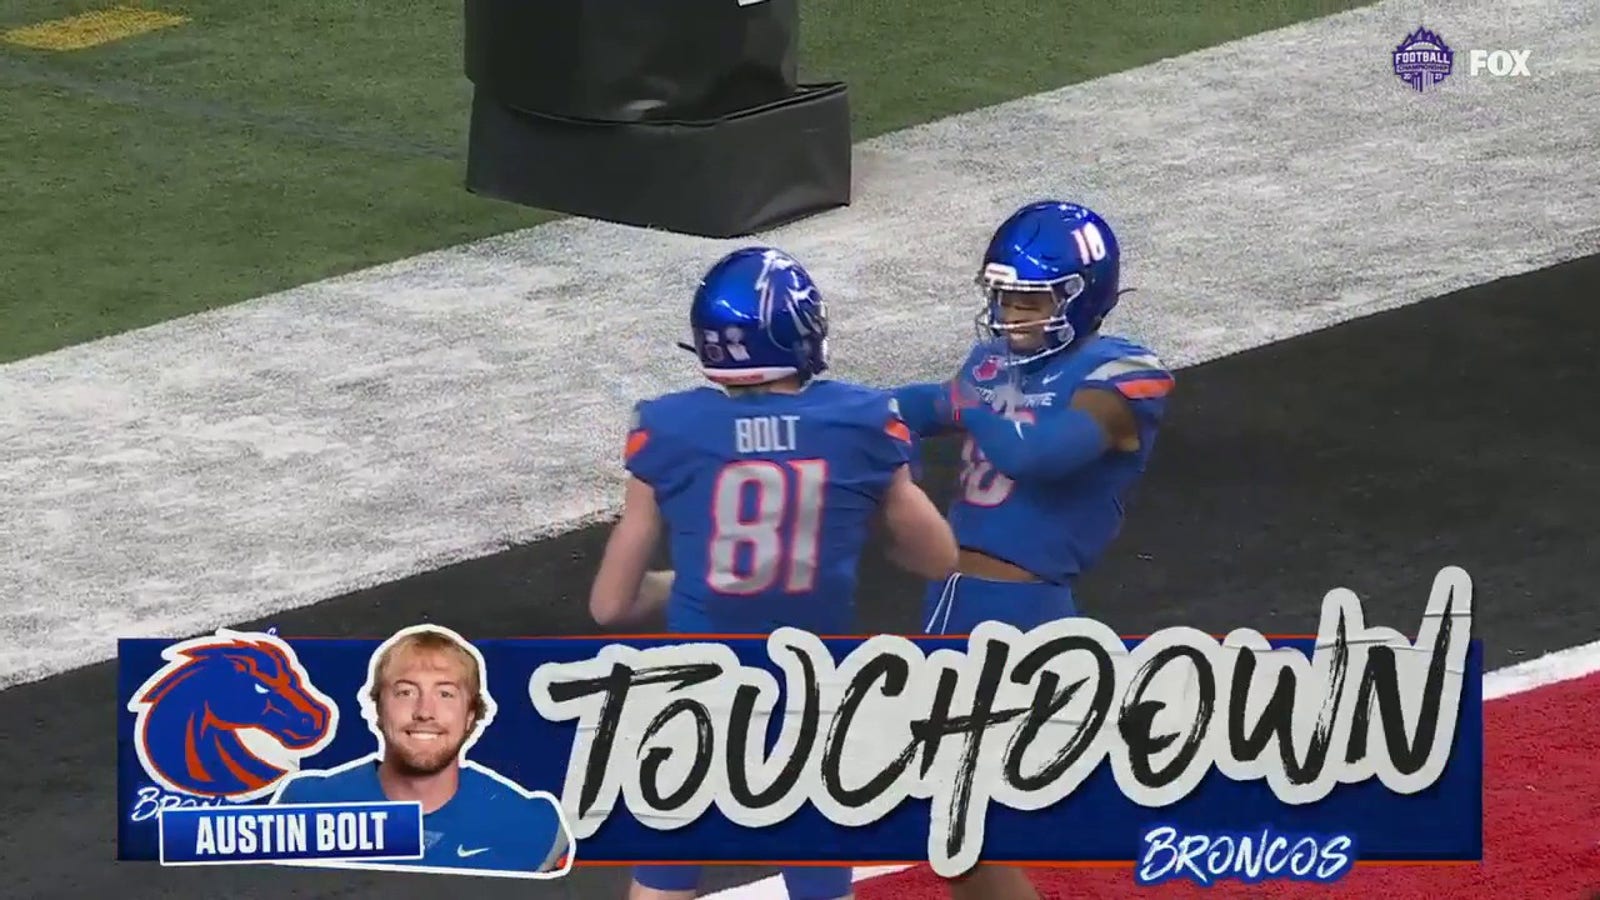 Boise State's Taylen Green links up with Austin Bolt for 57-yard TD